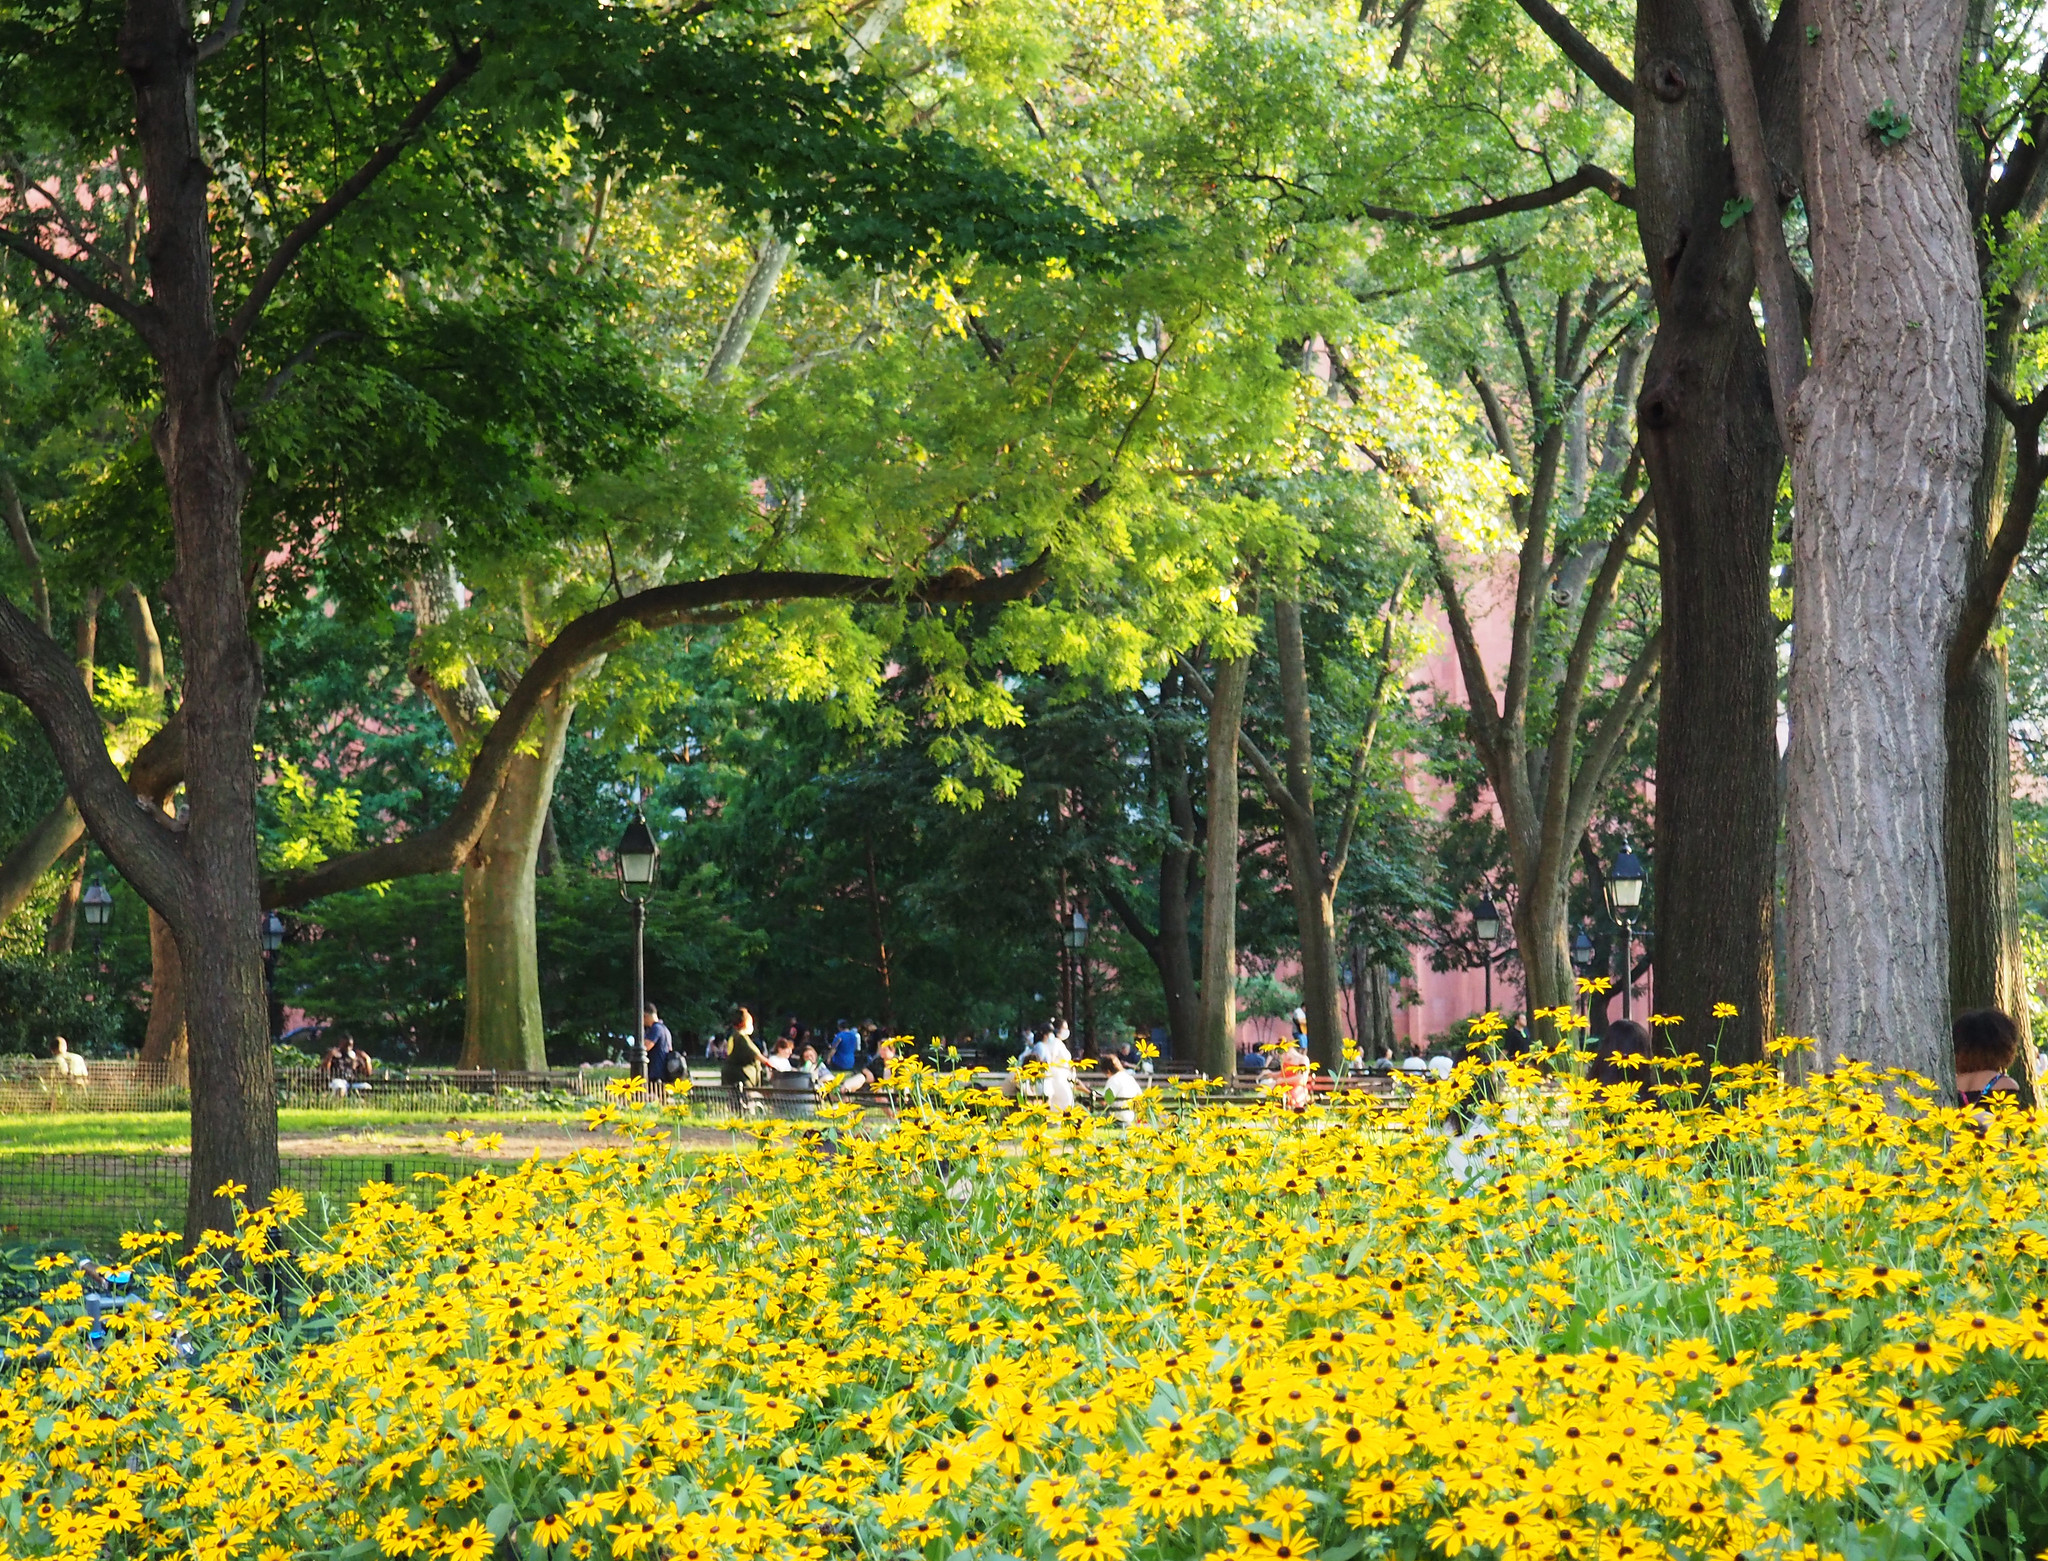 field of bright yellow flowers in the park